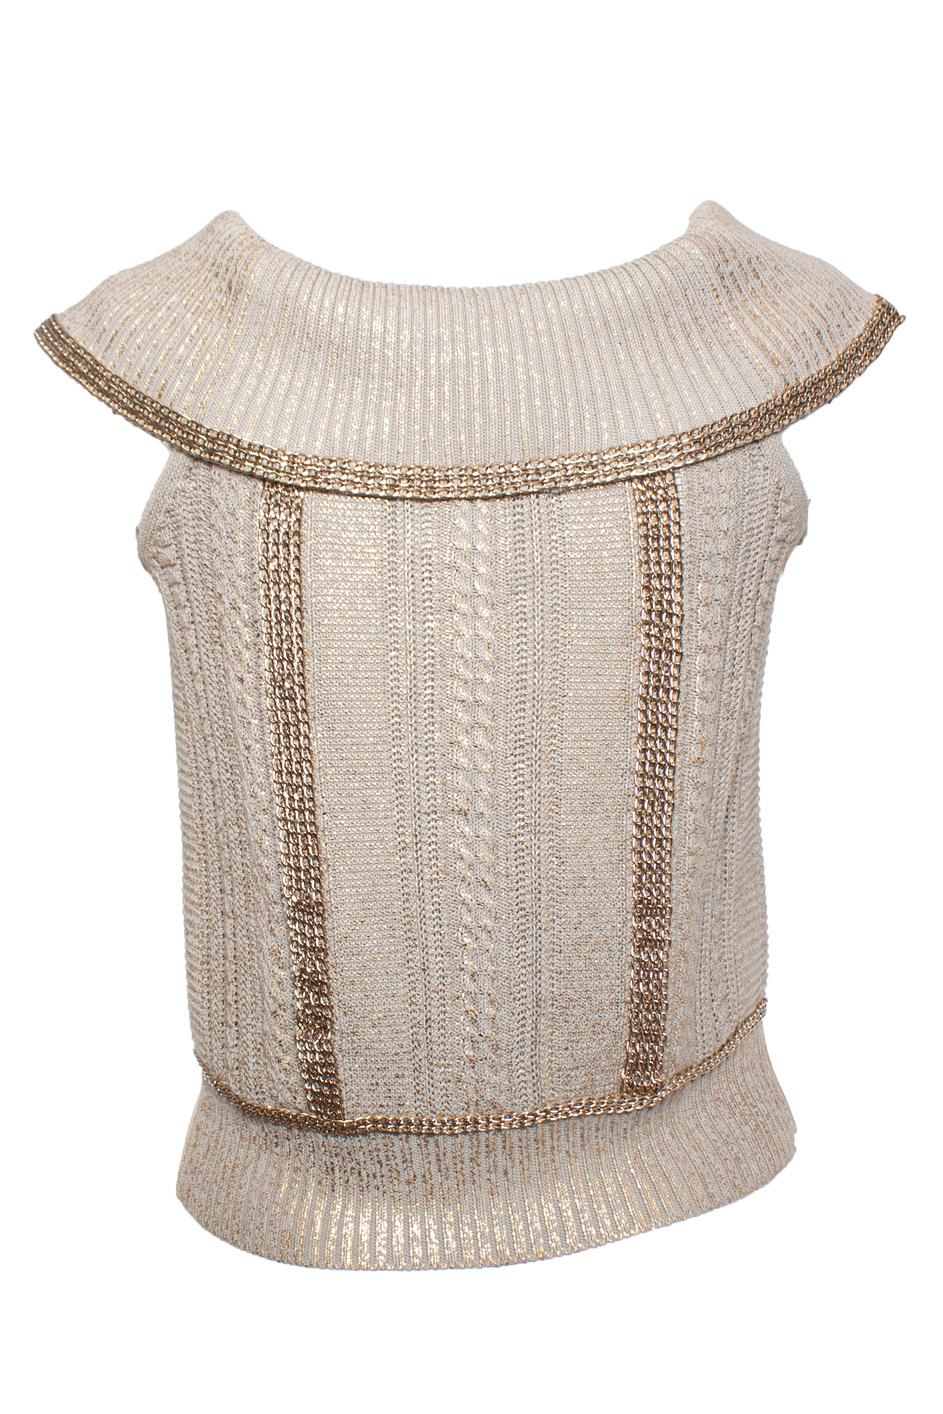 Chanel, beige knitted top with chains and golden buttons. The item is in very good condition.

• CONDITION: very good condition 

• SIZE: FR38 - S 

• MEASUREMENTS: length 52 cm, width 40 cm, waist 41 cm, shoulder width 40 cm (stretch)

• MATERIAL: